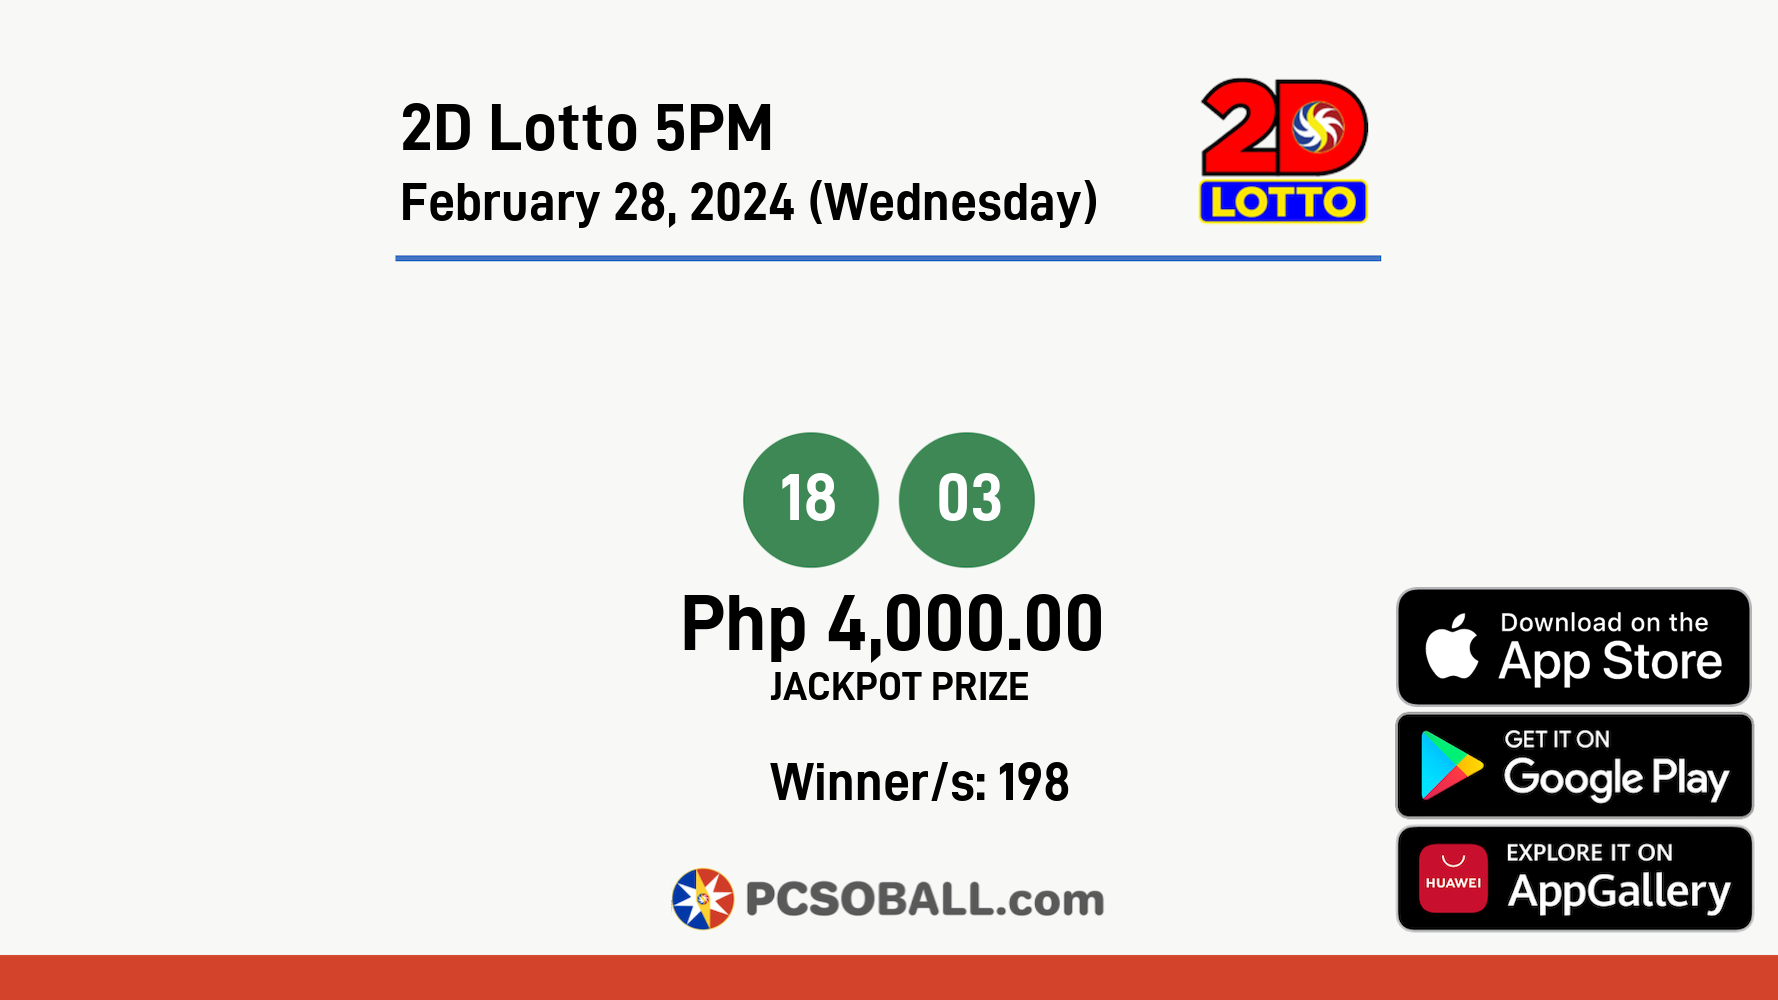 2D Lotto 5PM February 28, 2024 (Wednesday) Result